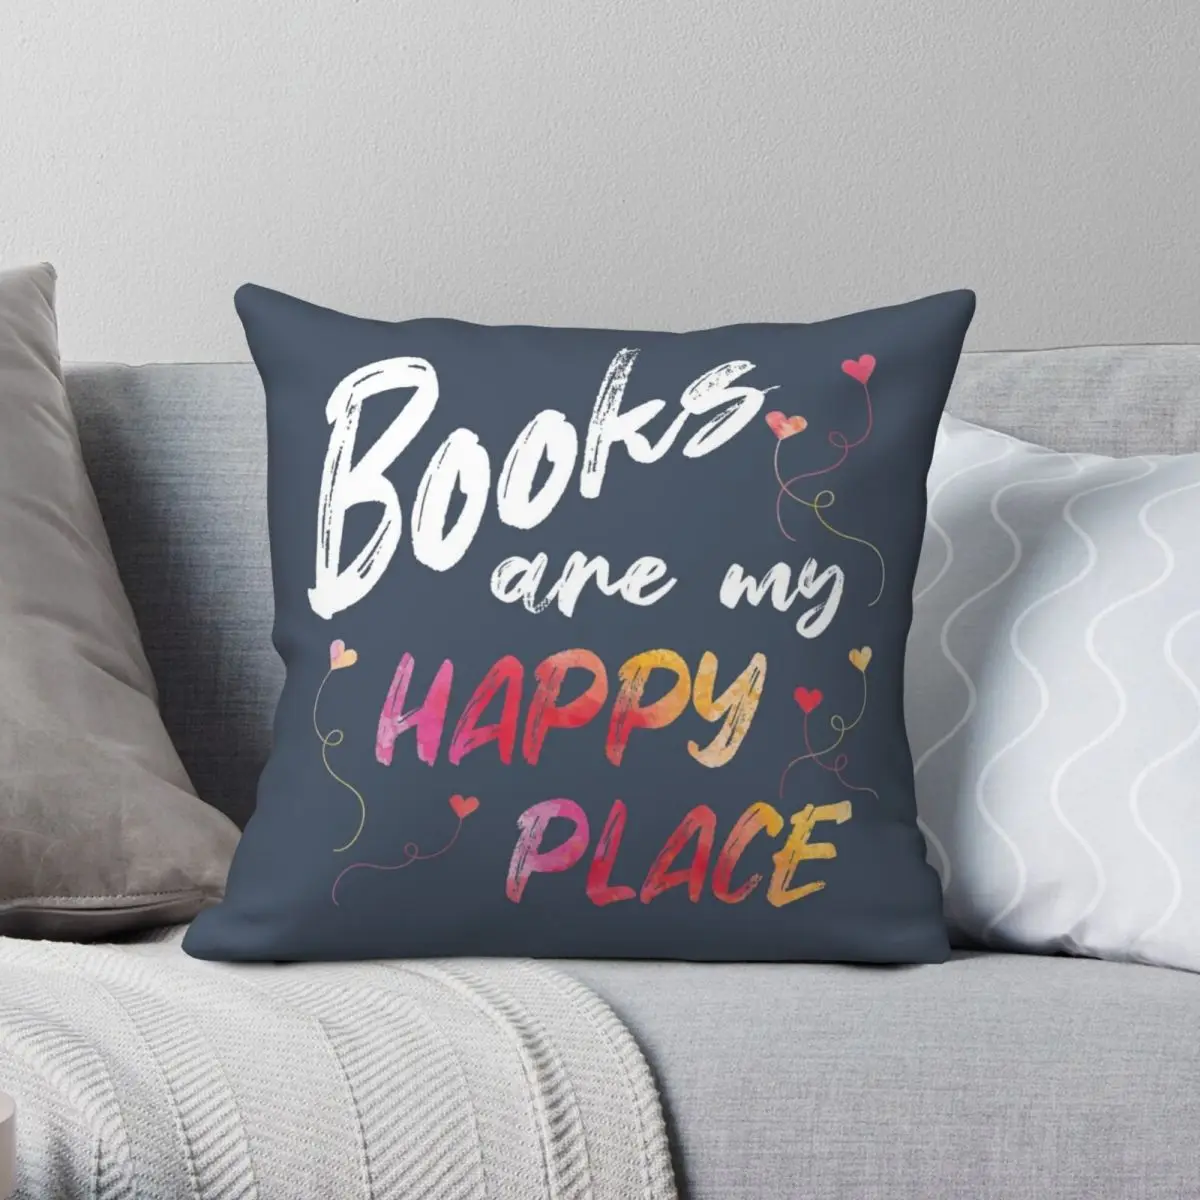 

Books Are My Happy Place Square Pillowcase Polyester Linen Velvet Creative Zip Decor Pillow Case Room Cushion Cover 18"